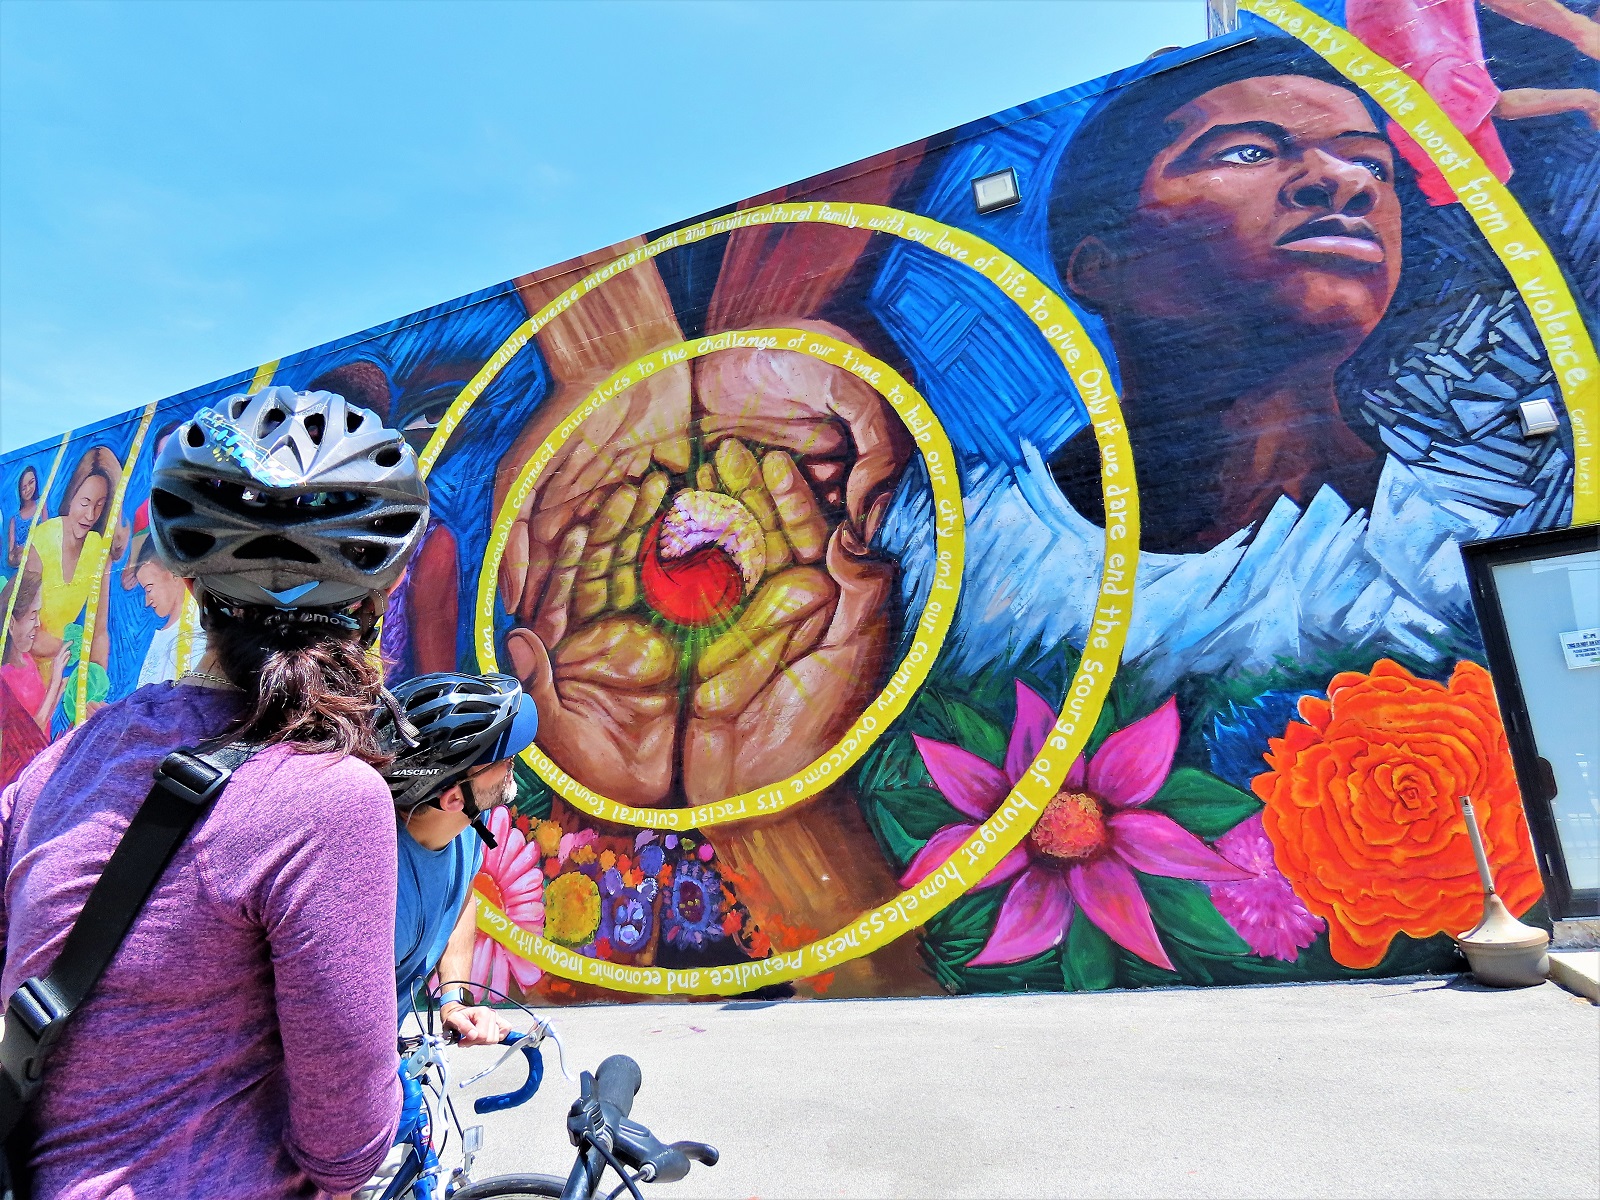 Two CBA bike tour riders looking at a Mexican style mural with four hands holding a heart circled by two concentric yellow rings and a Black boy looking into the distance.